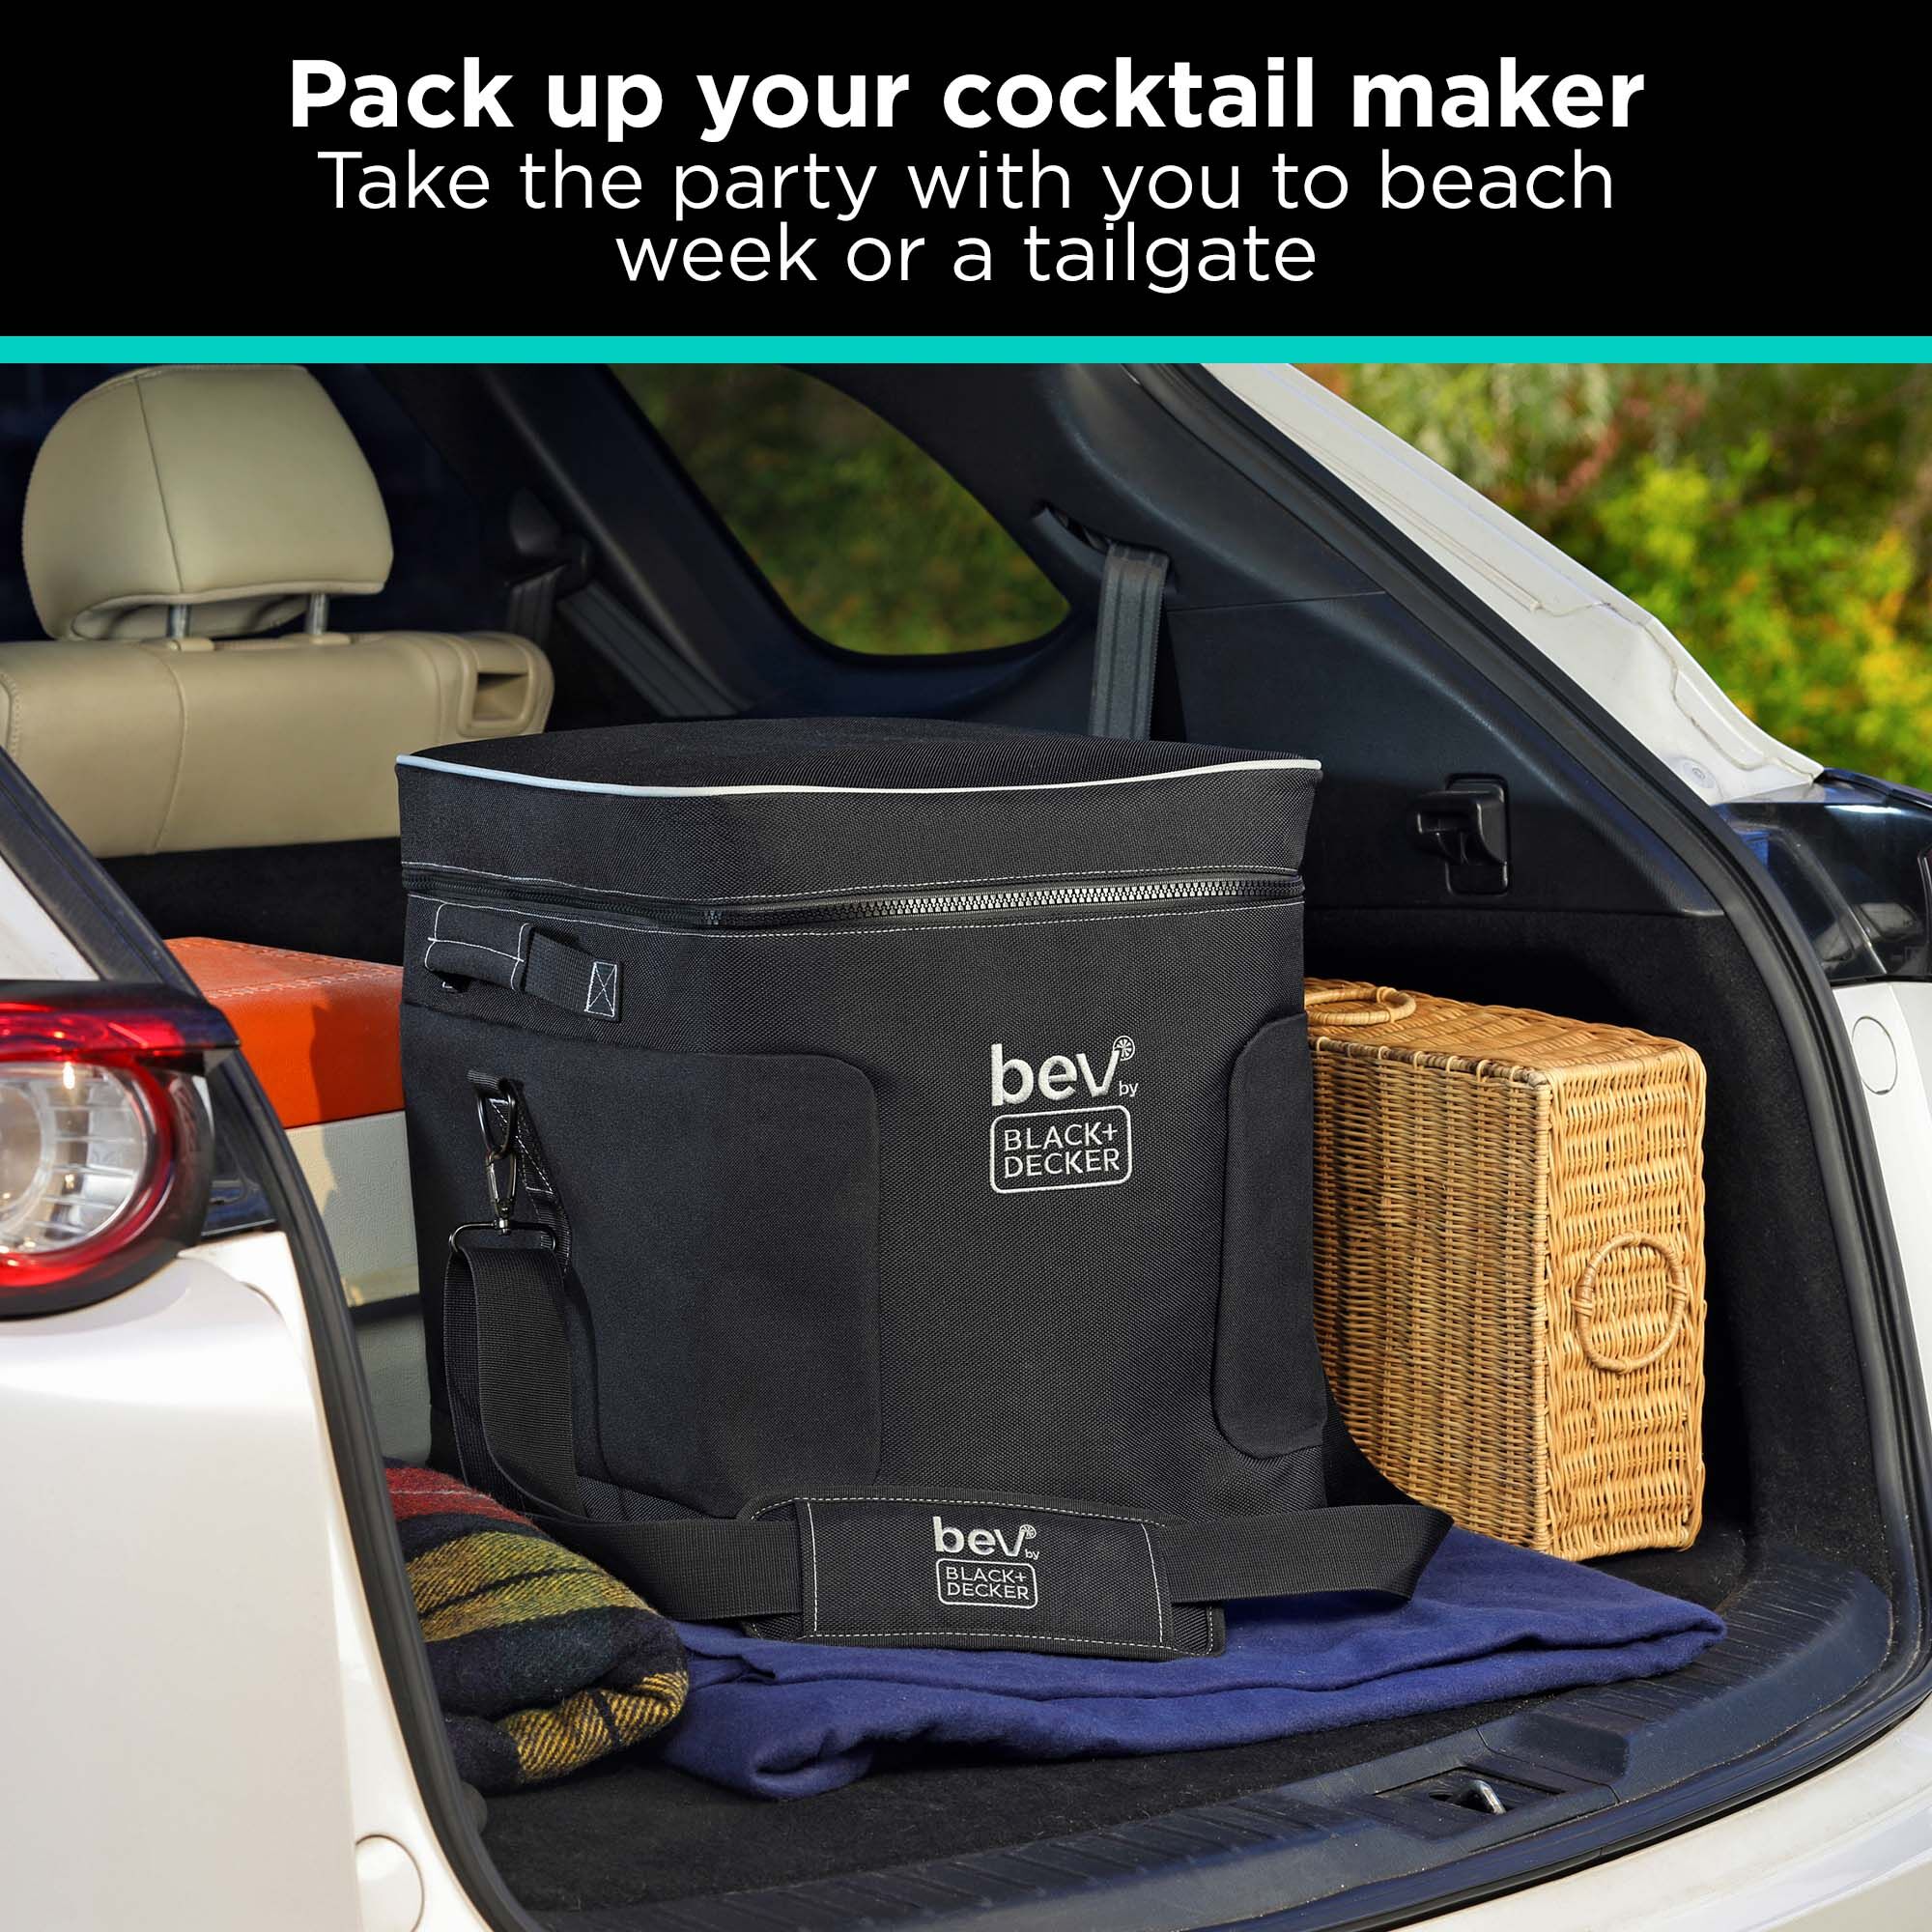 bev by BLACK+DECKER™ cocktail maker storage bag being transported in the trunk of a car